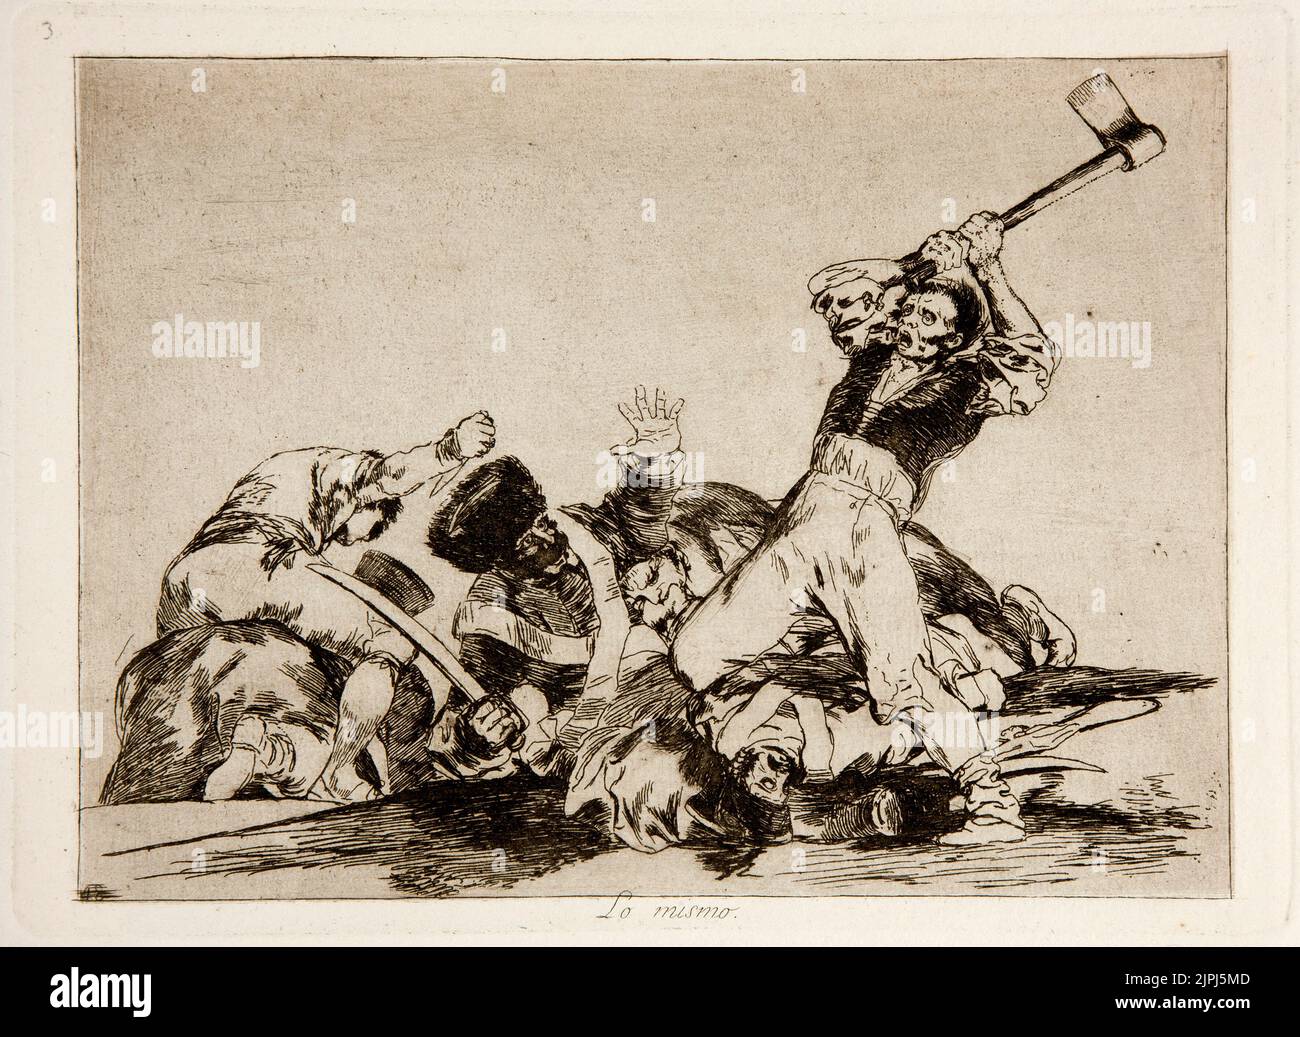 Lo mismo (The same). A man about to cut off the head of a soldier with an axe. By Francisco de Goya Stock Photo